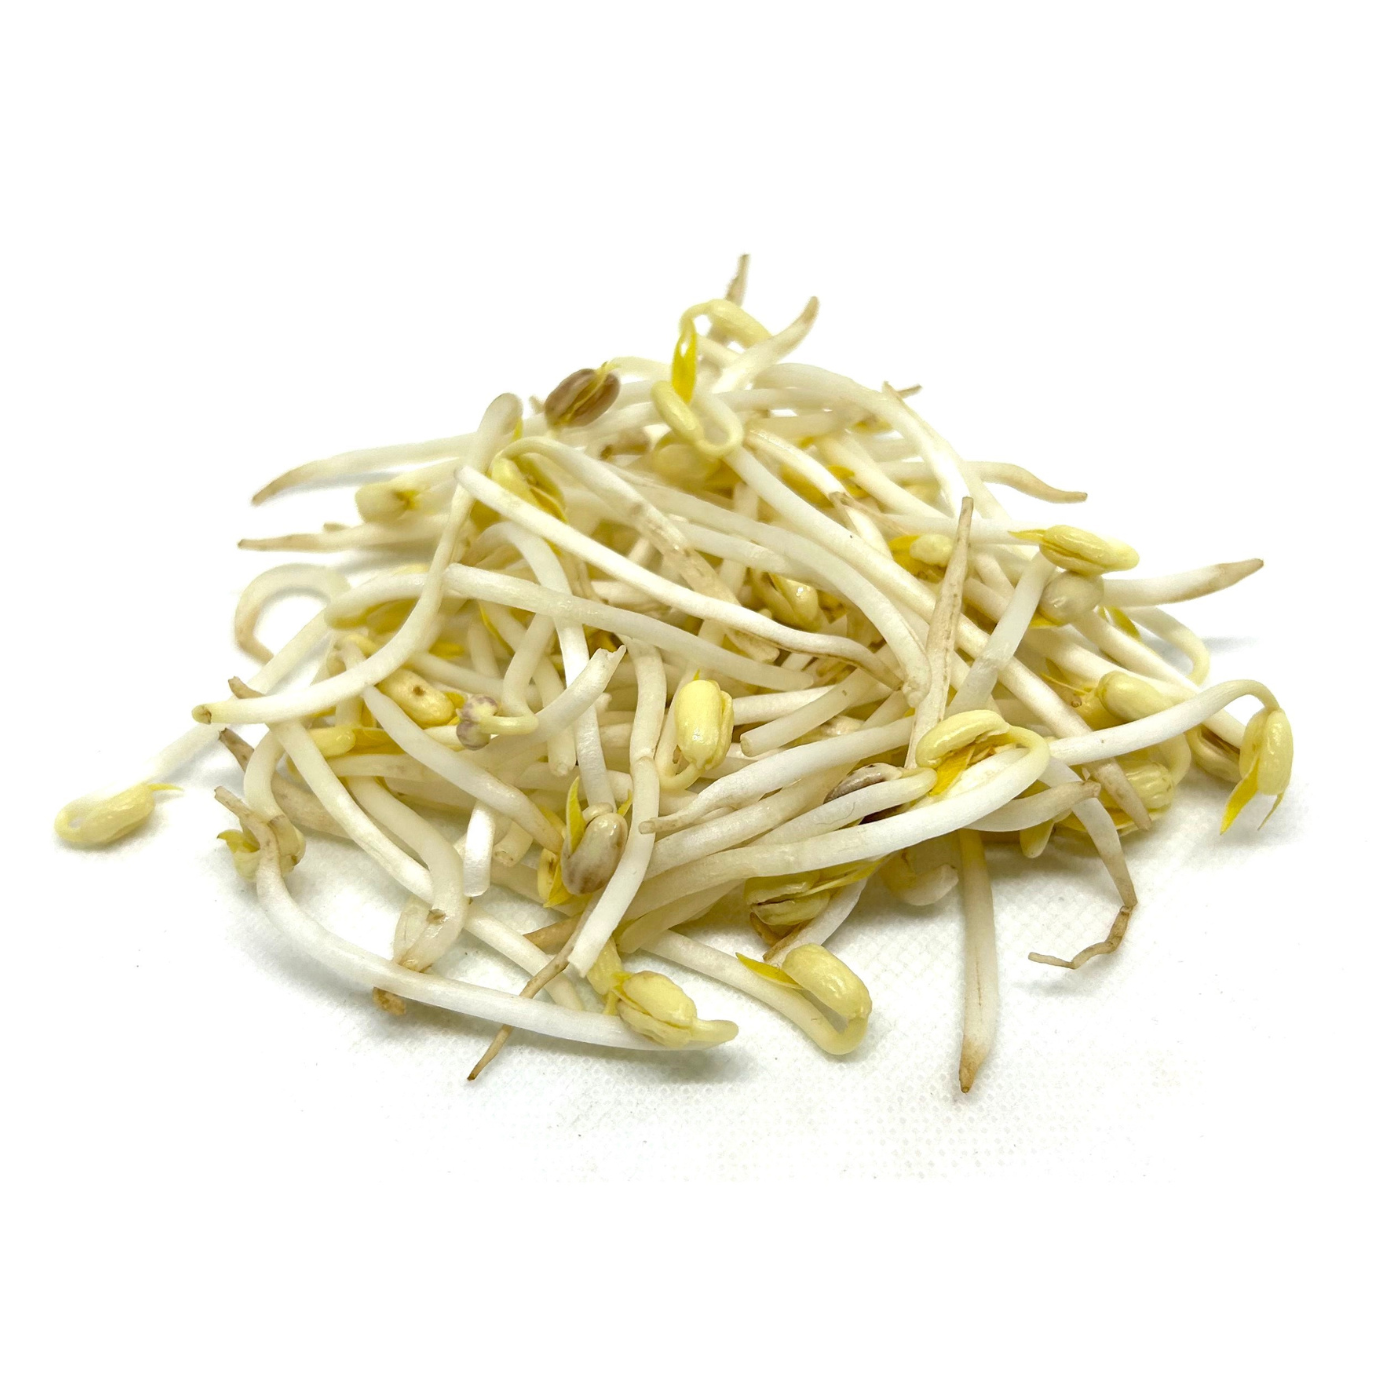 Organic soybean sprouts